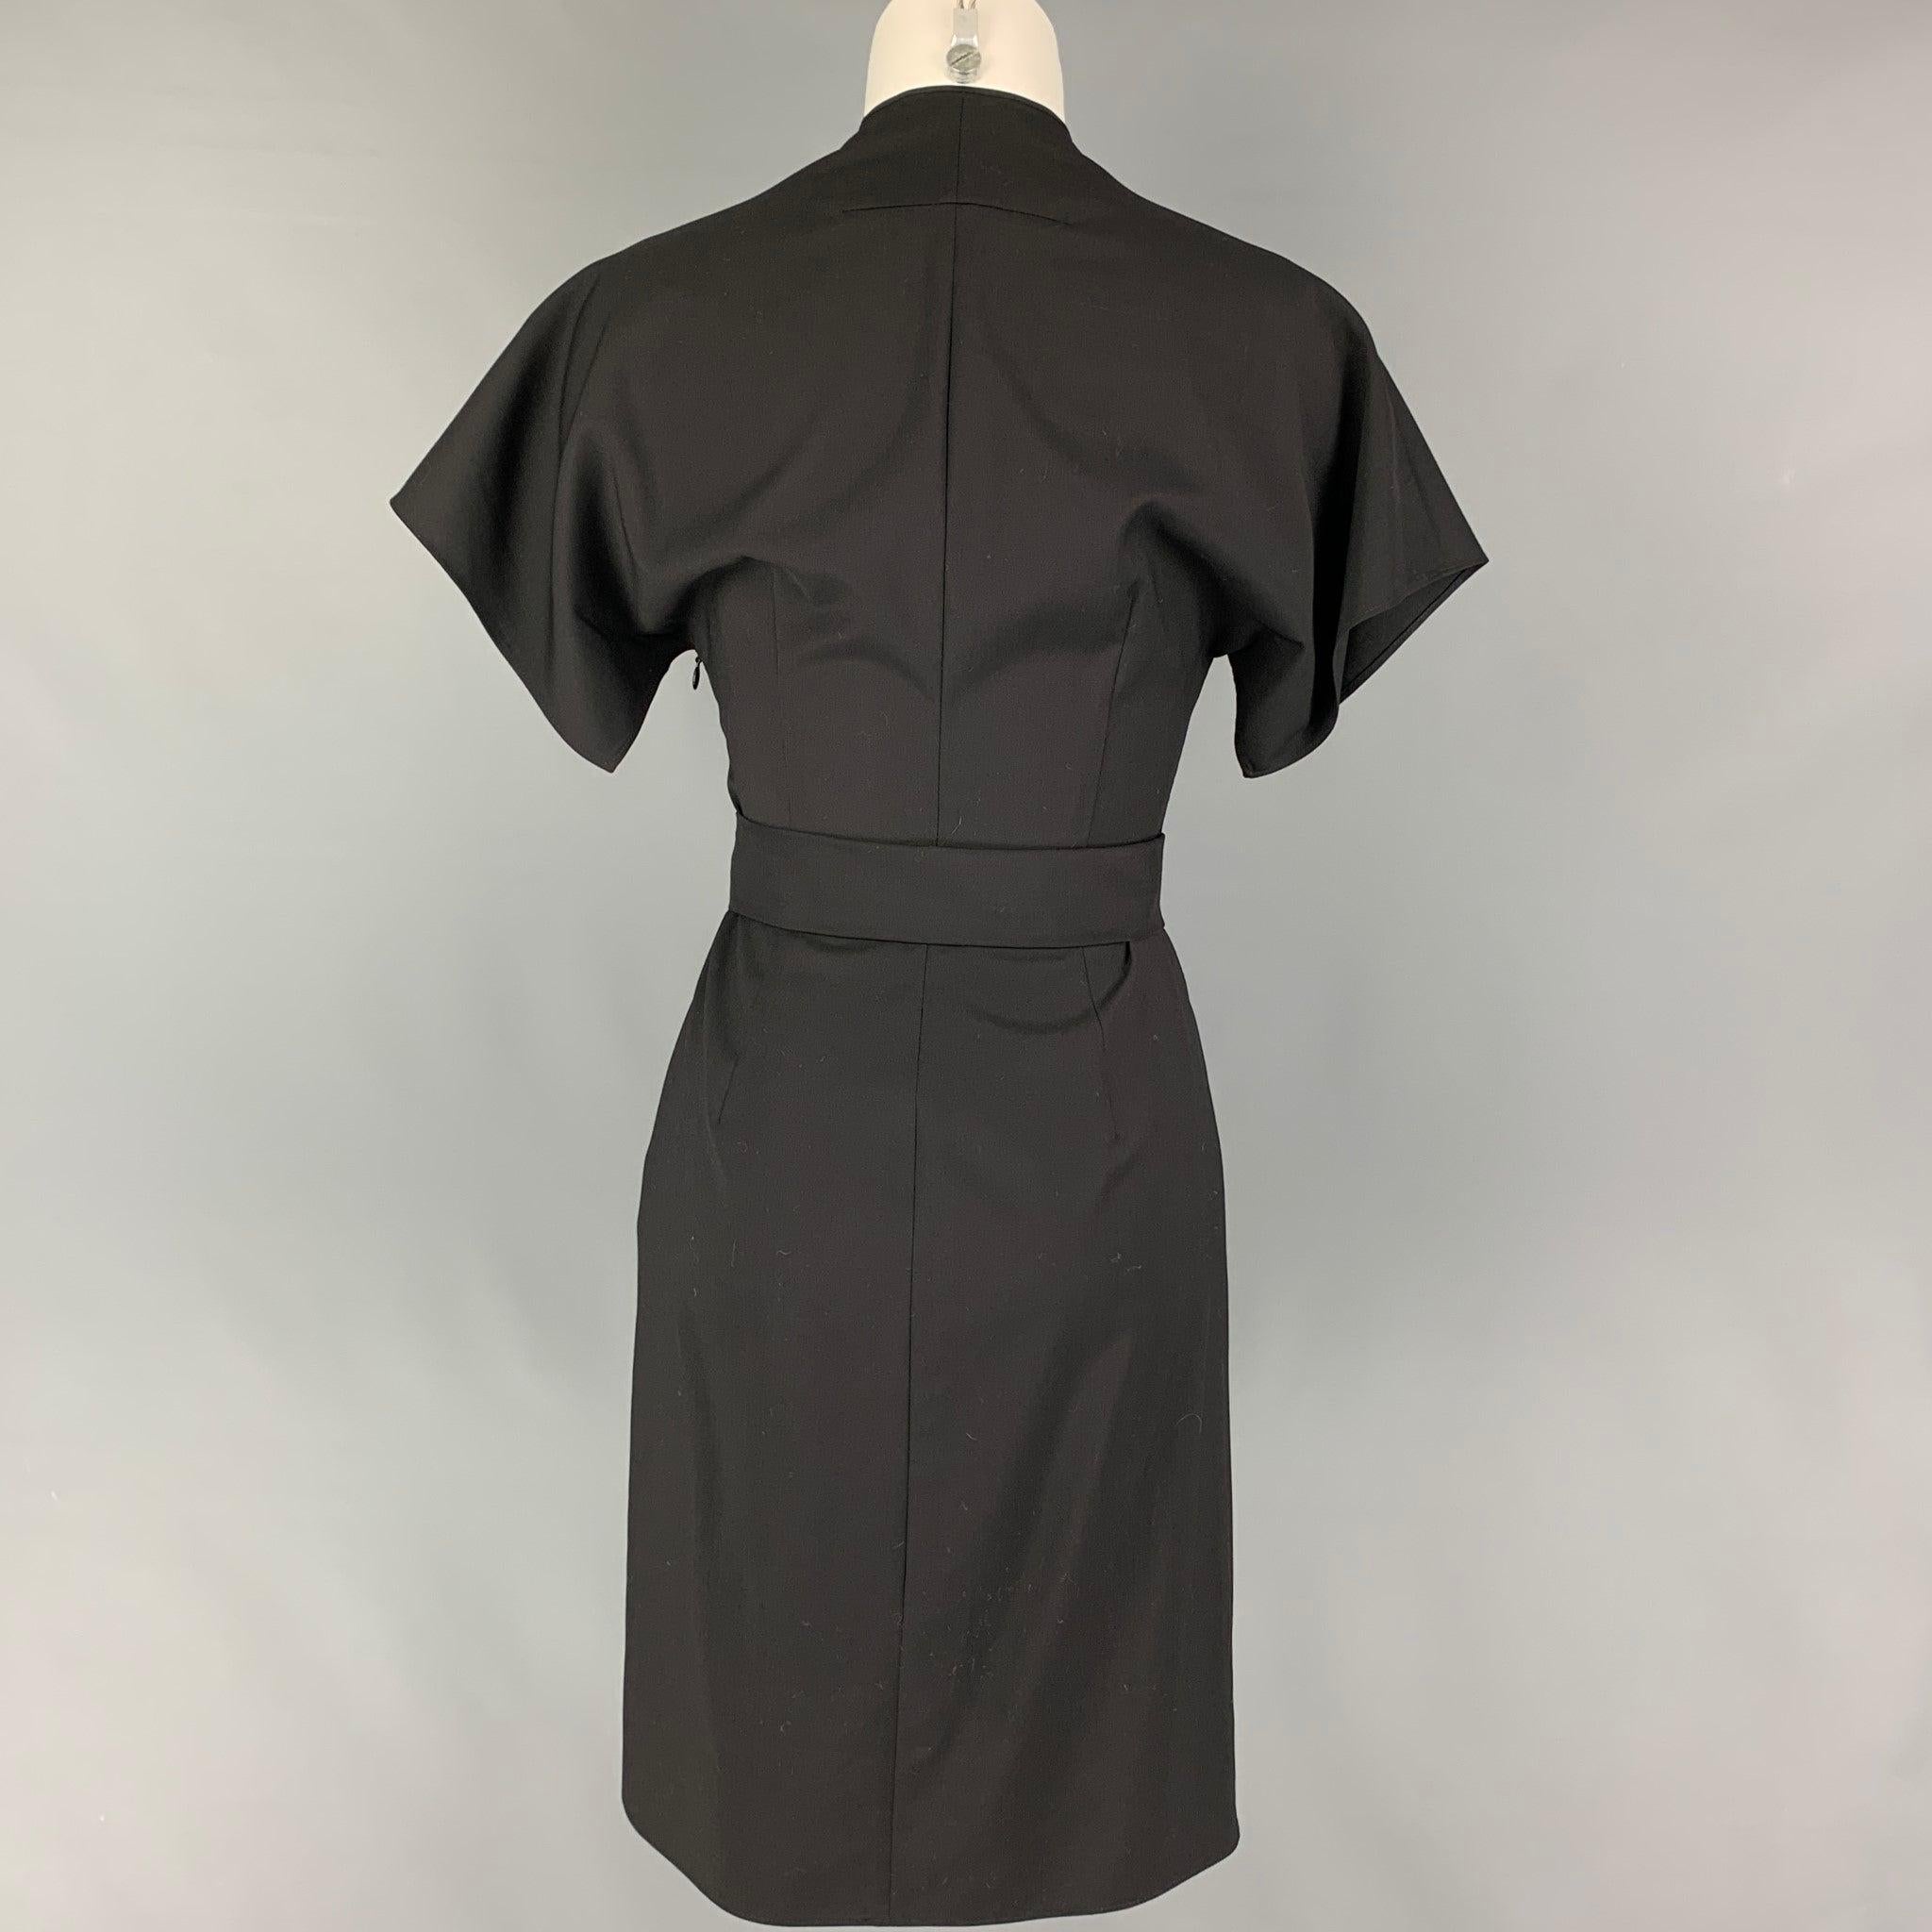 GIVENCHY Size 6 Black Virgin Wool Short Sleeve Dress In Good Condition For Sale In San Francisco, CA